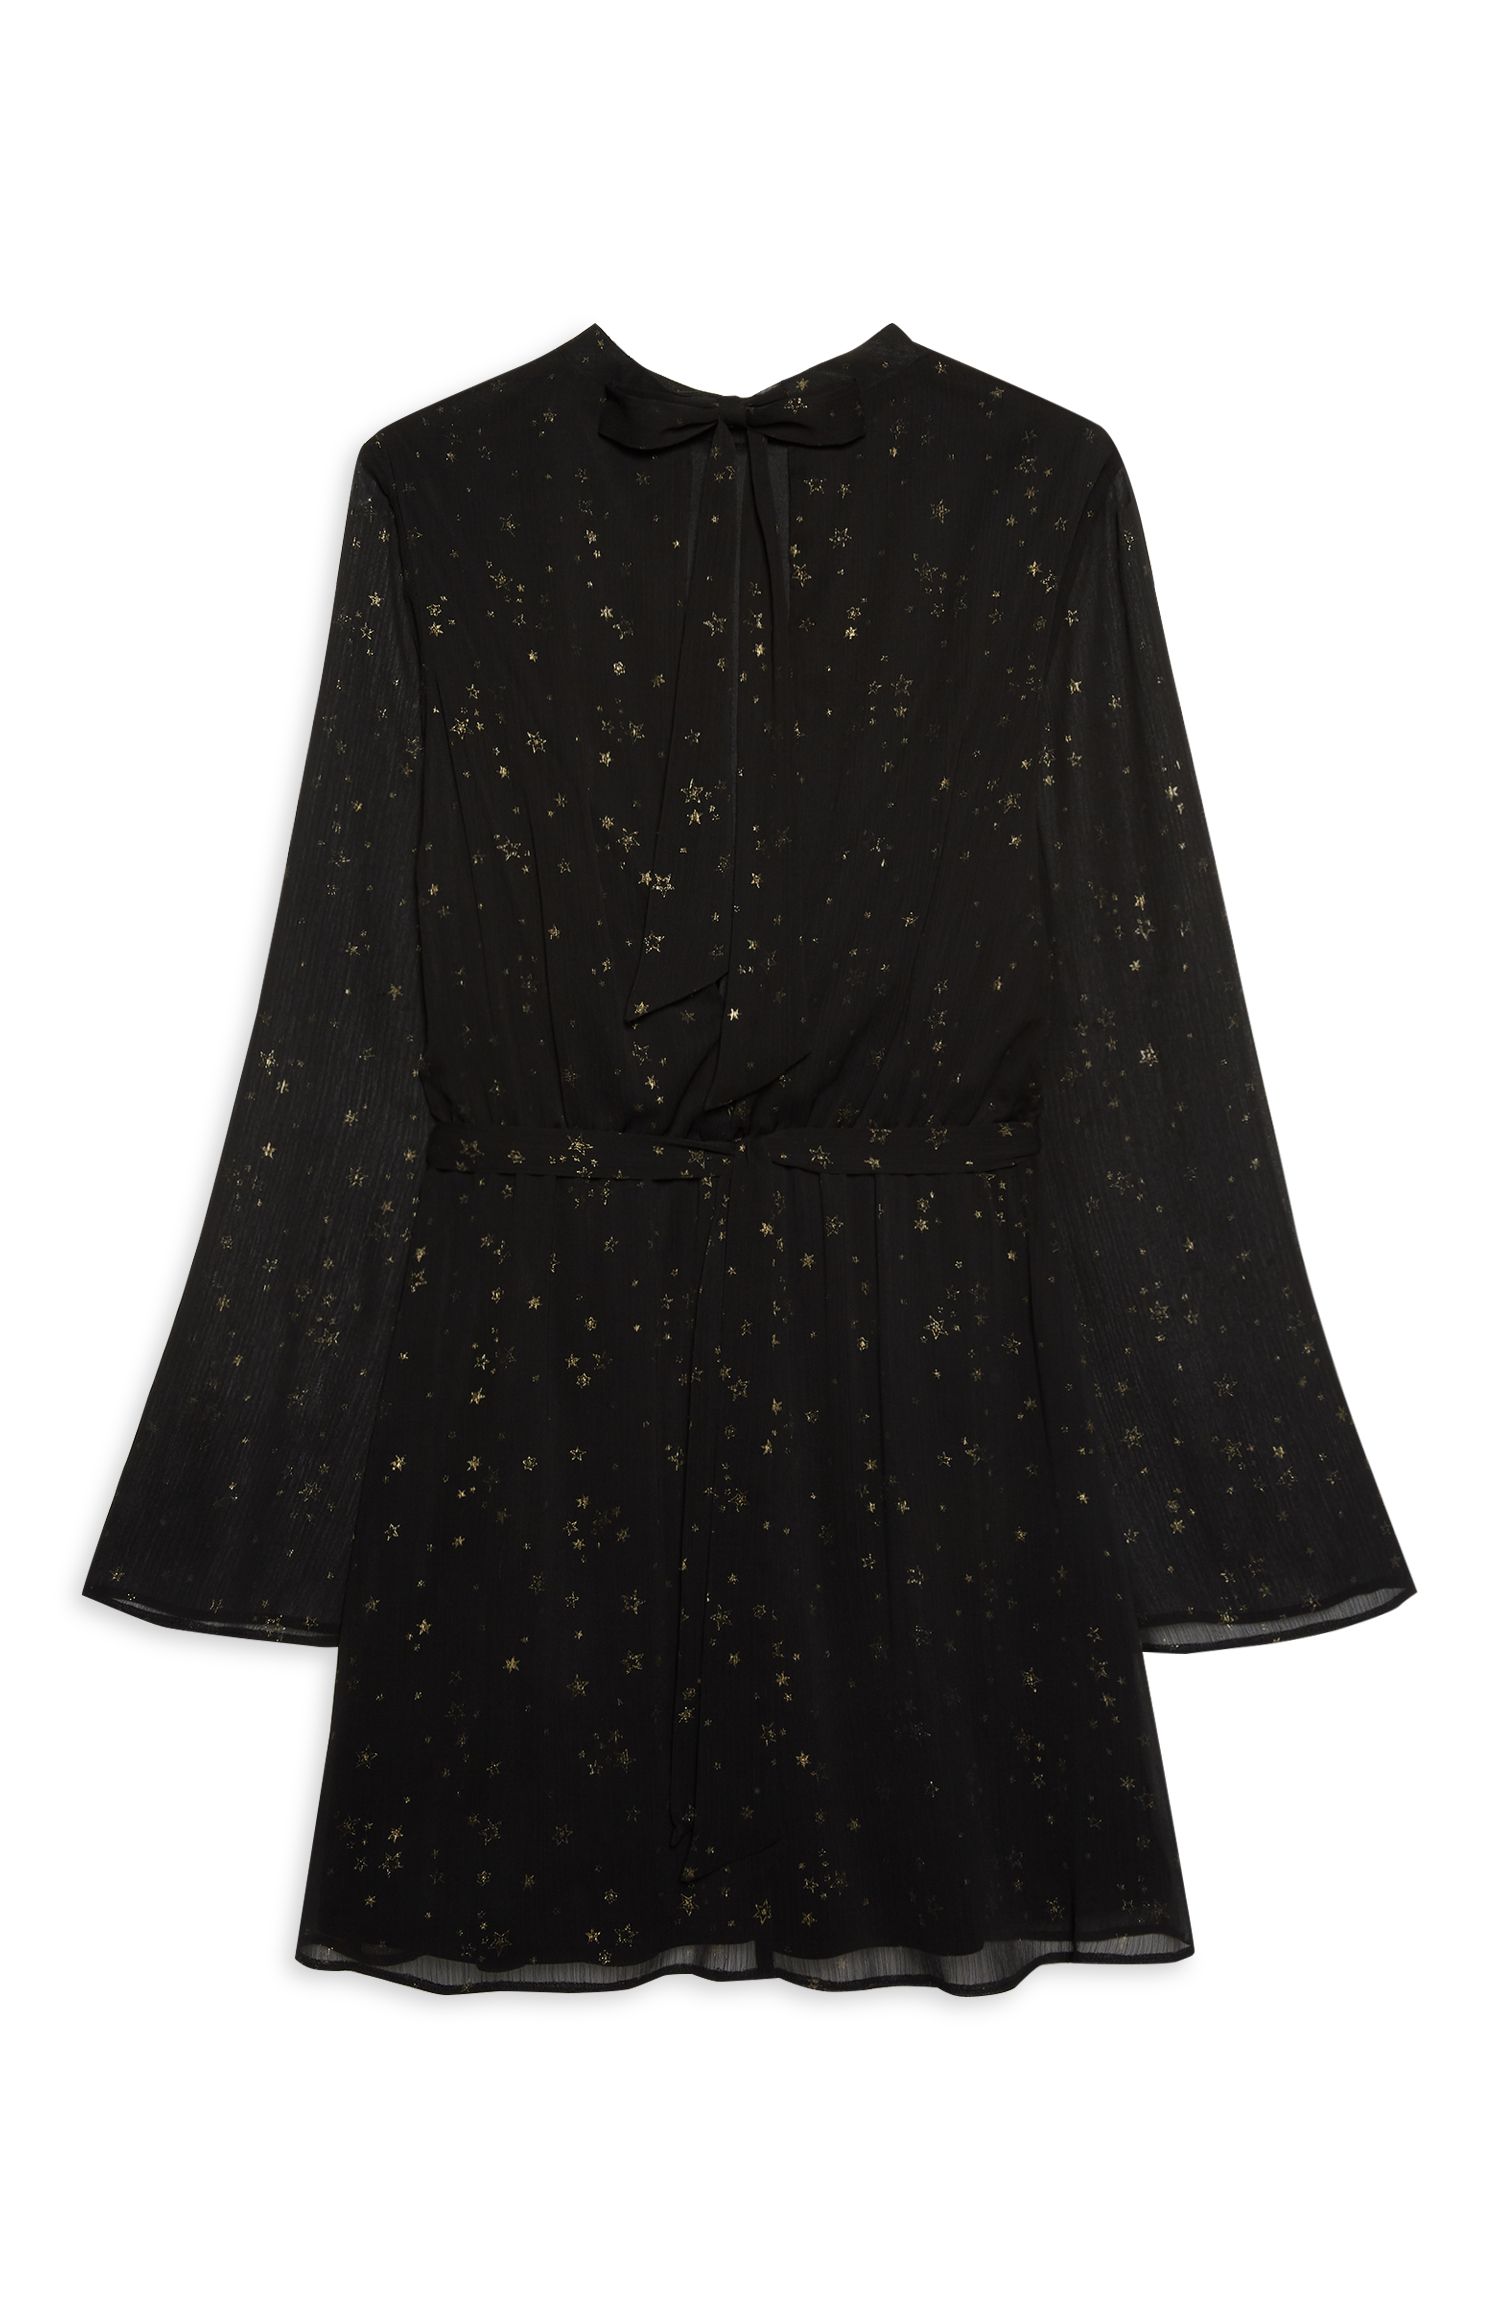 13 Primark dresses for your next ...